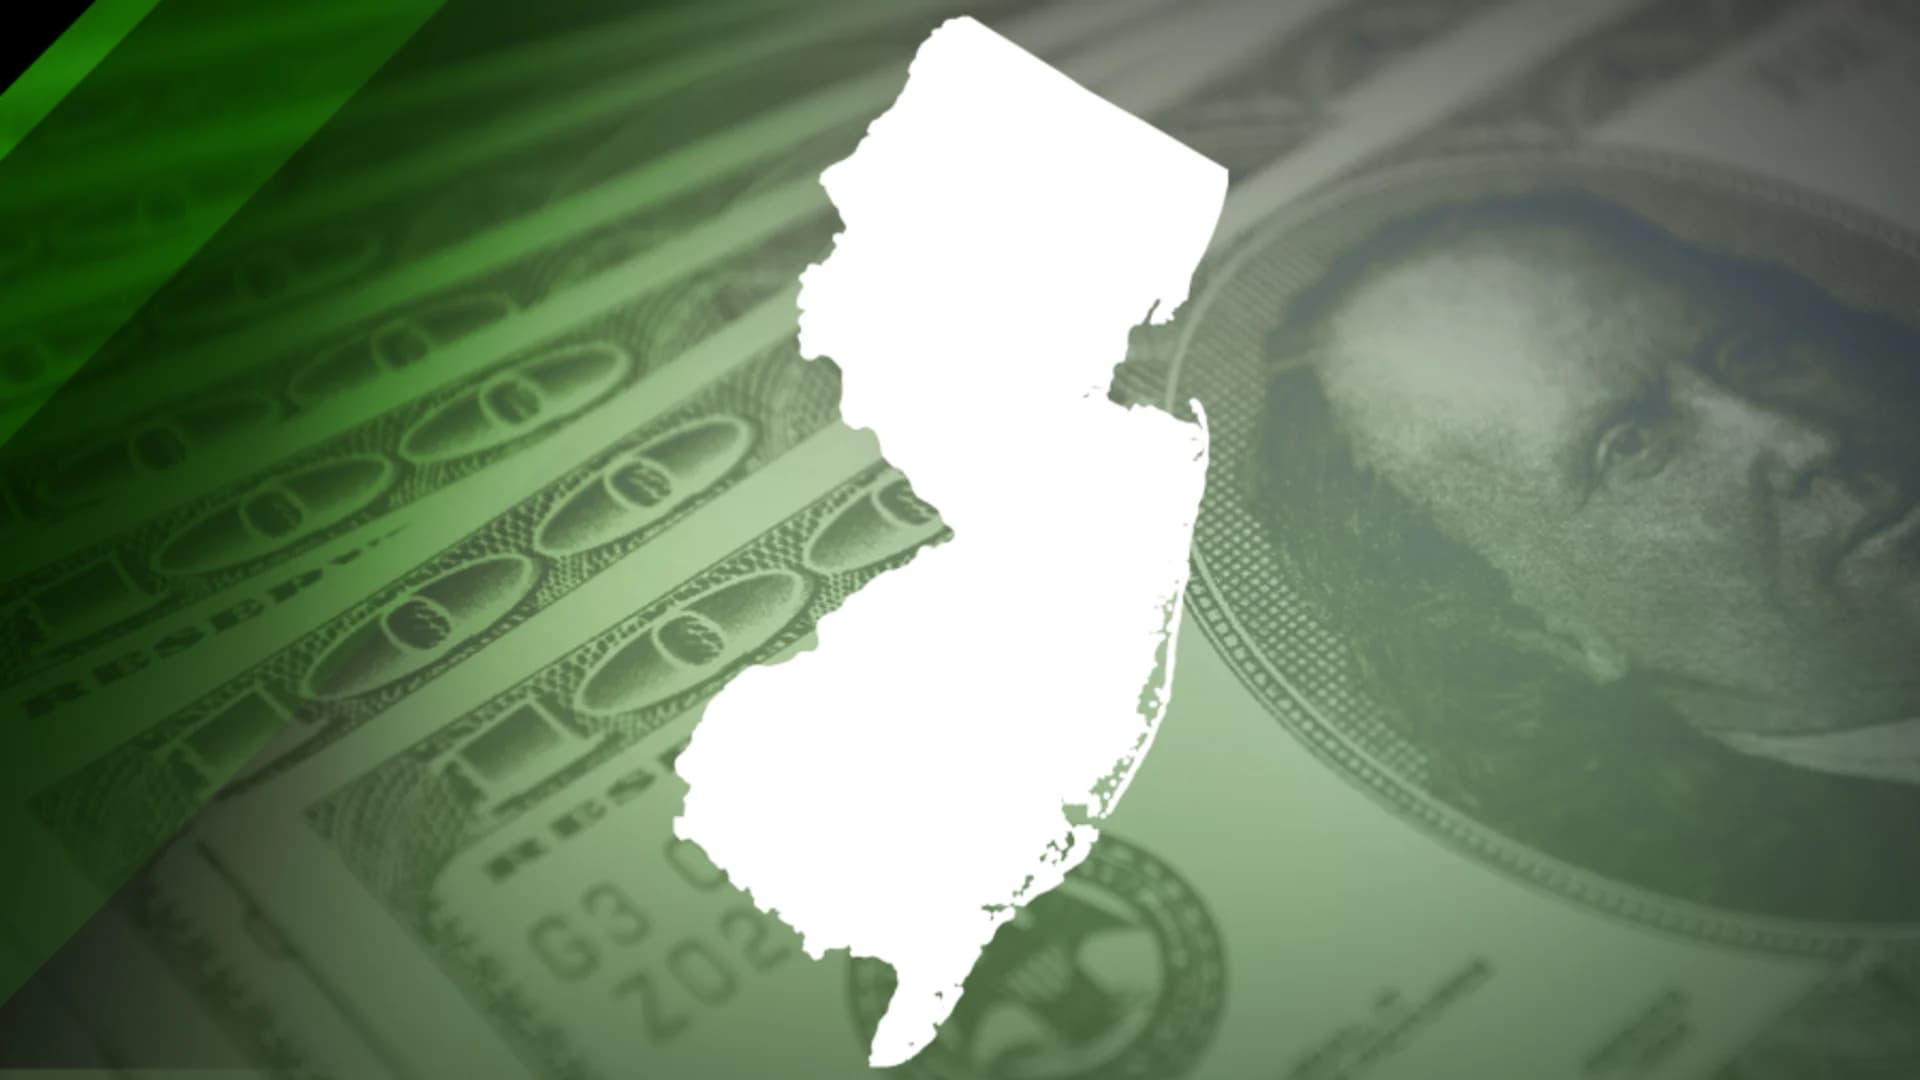 Nearly 150k New Jersey businesses get $17.2B in loans